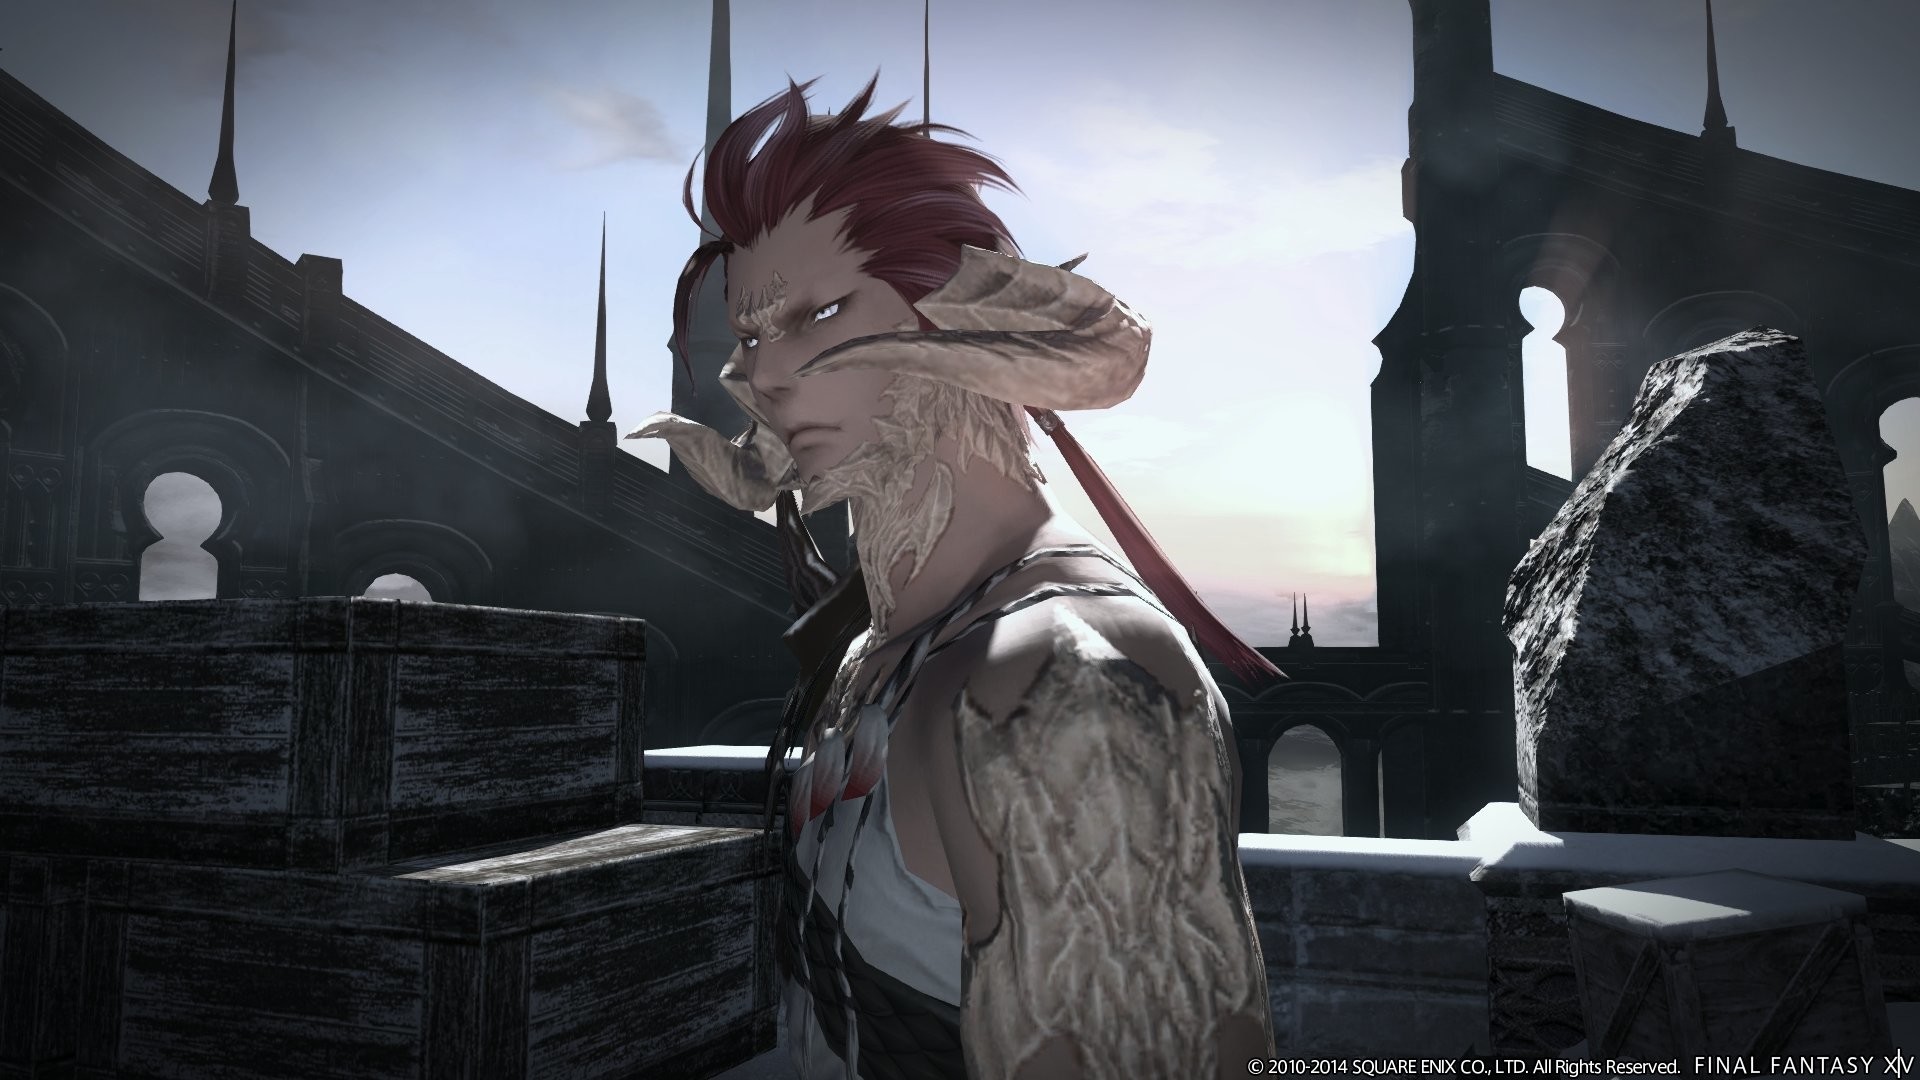 1920x1080 Amazing Final Fantasy XIV Expansion Screenshots Show New Jobs, New Race and  More in Shiny 1080p